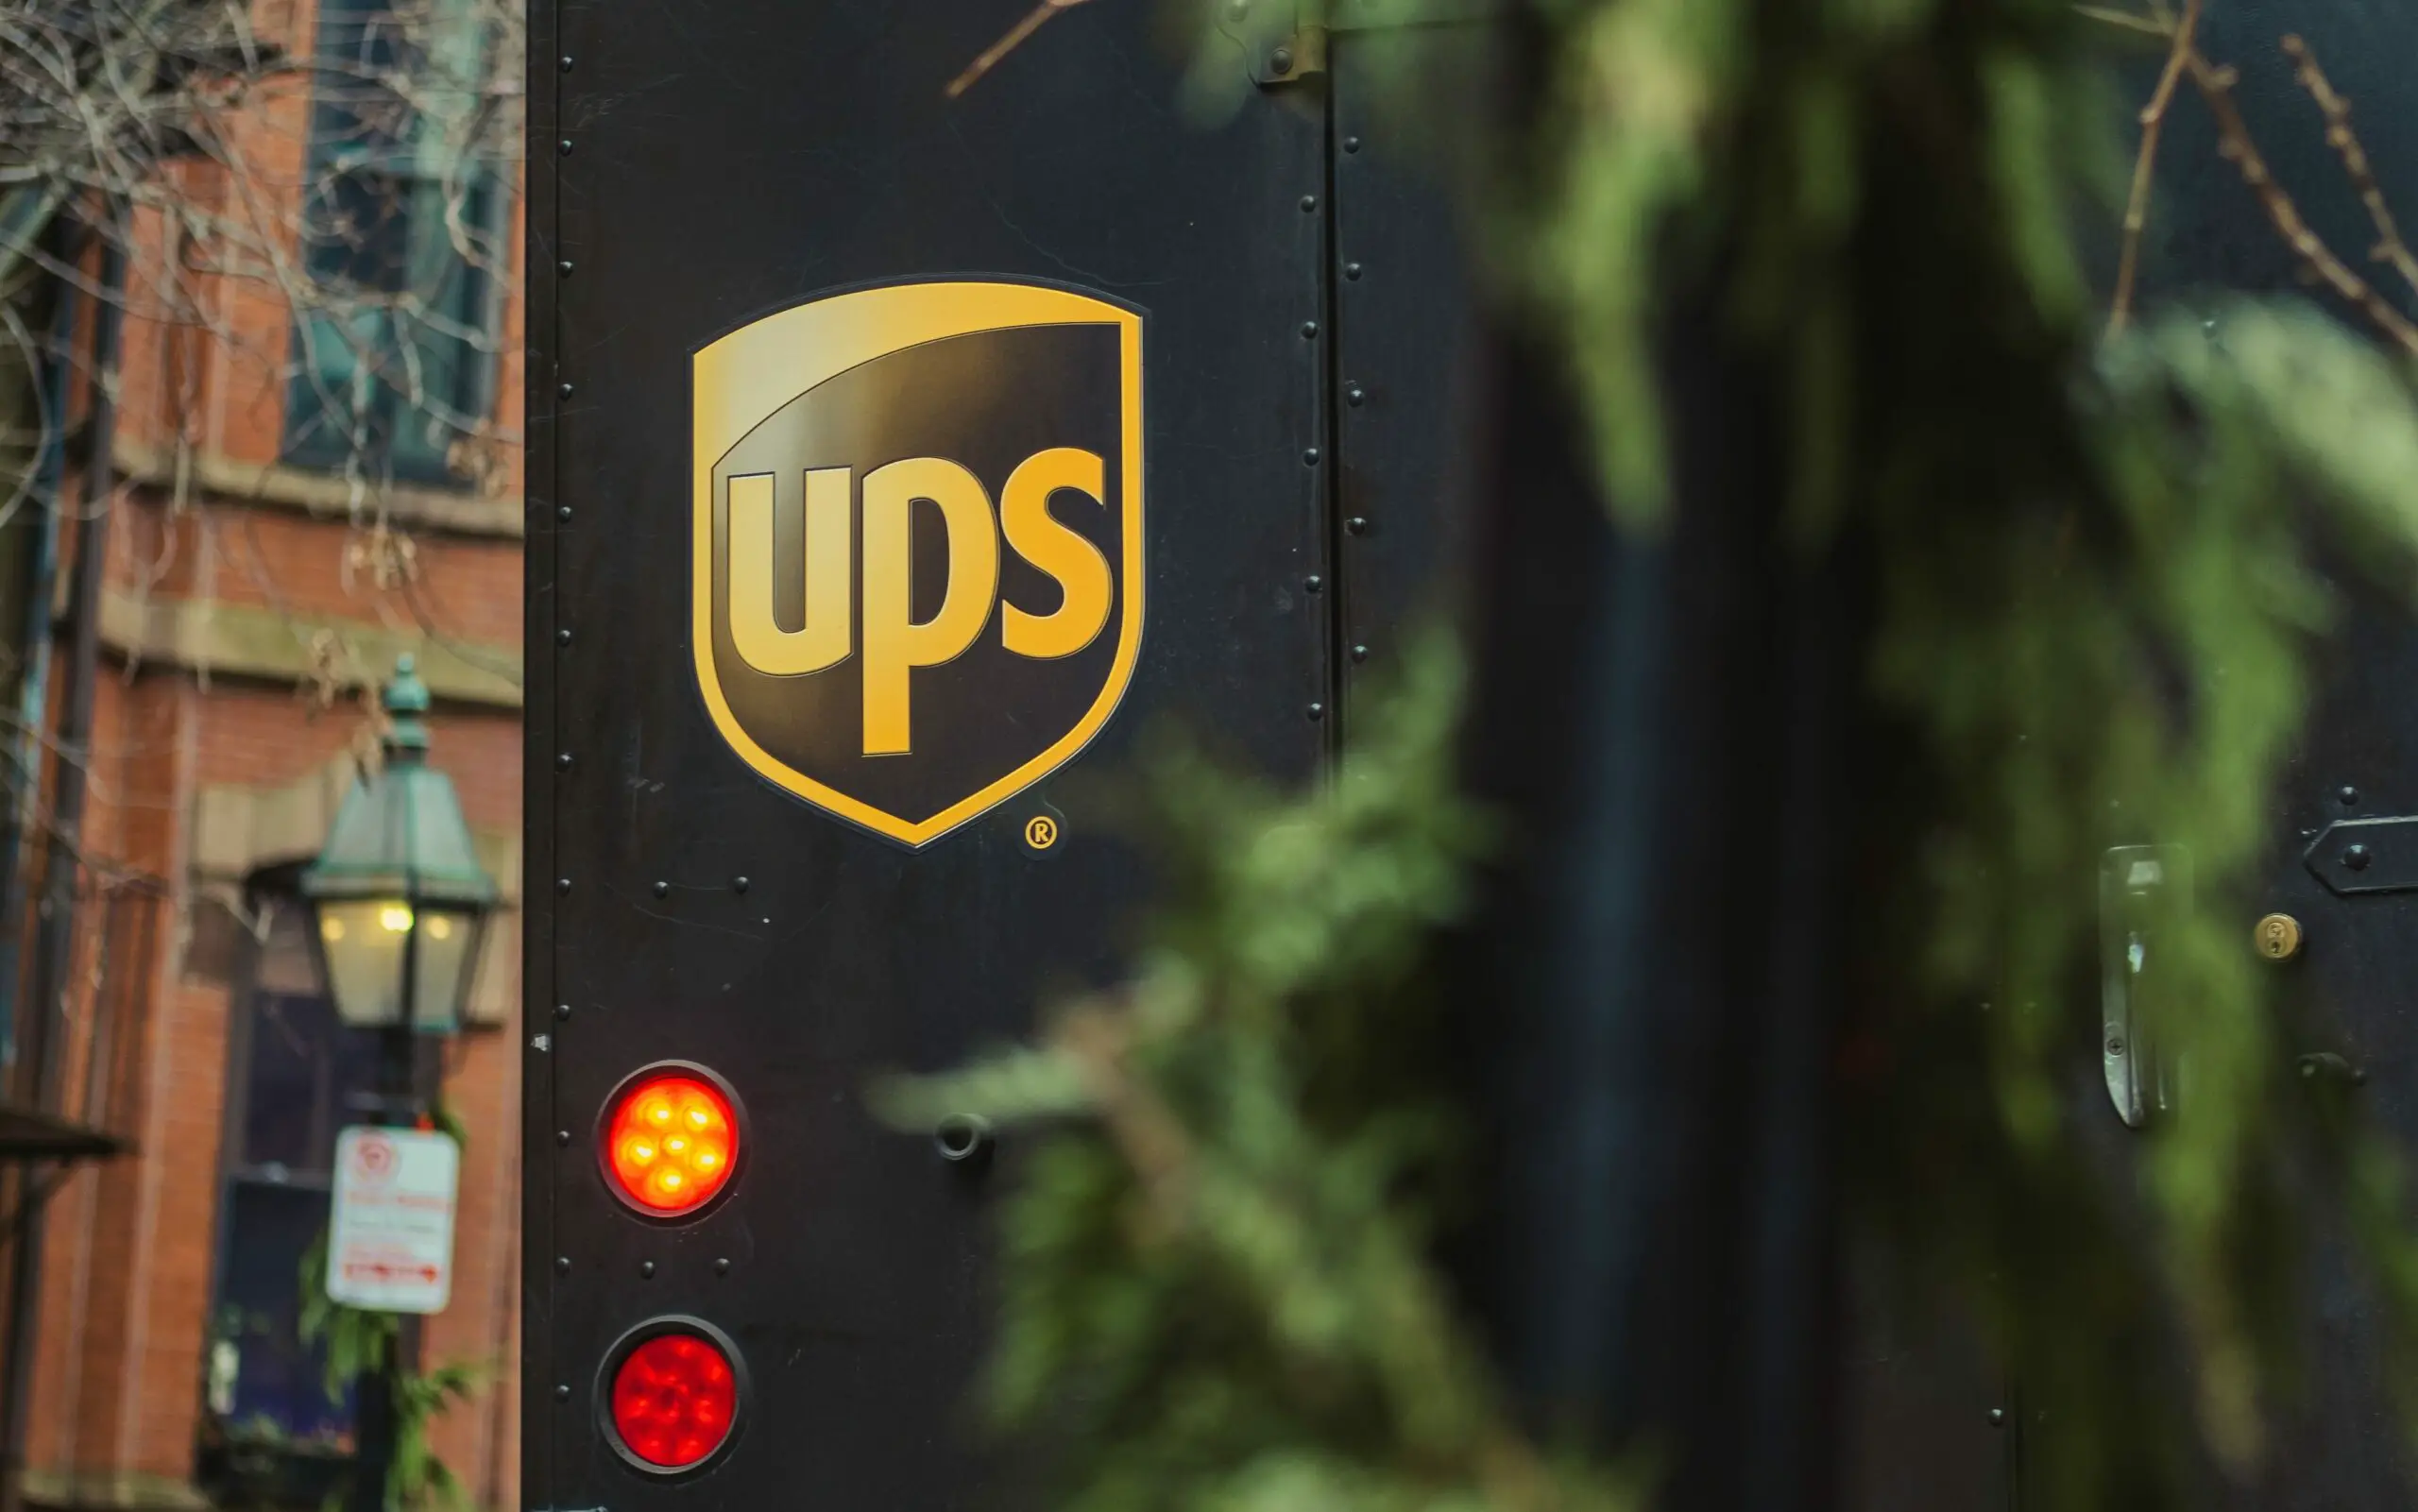 What Is UPS? - Know More